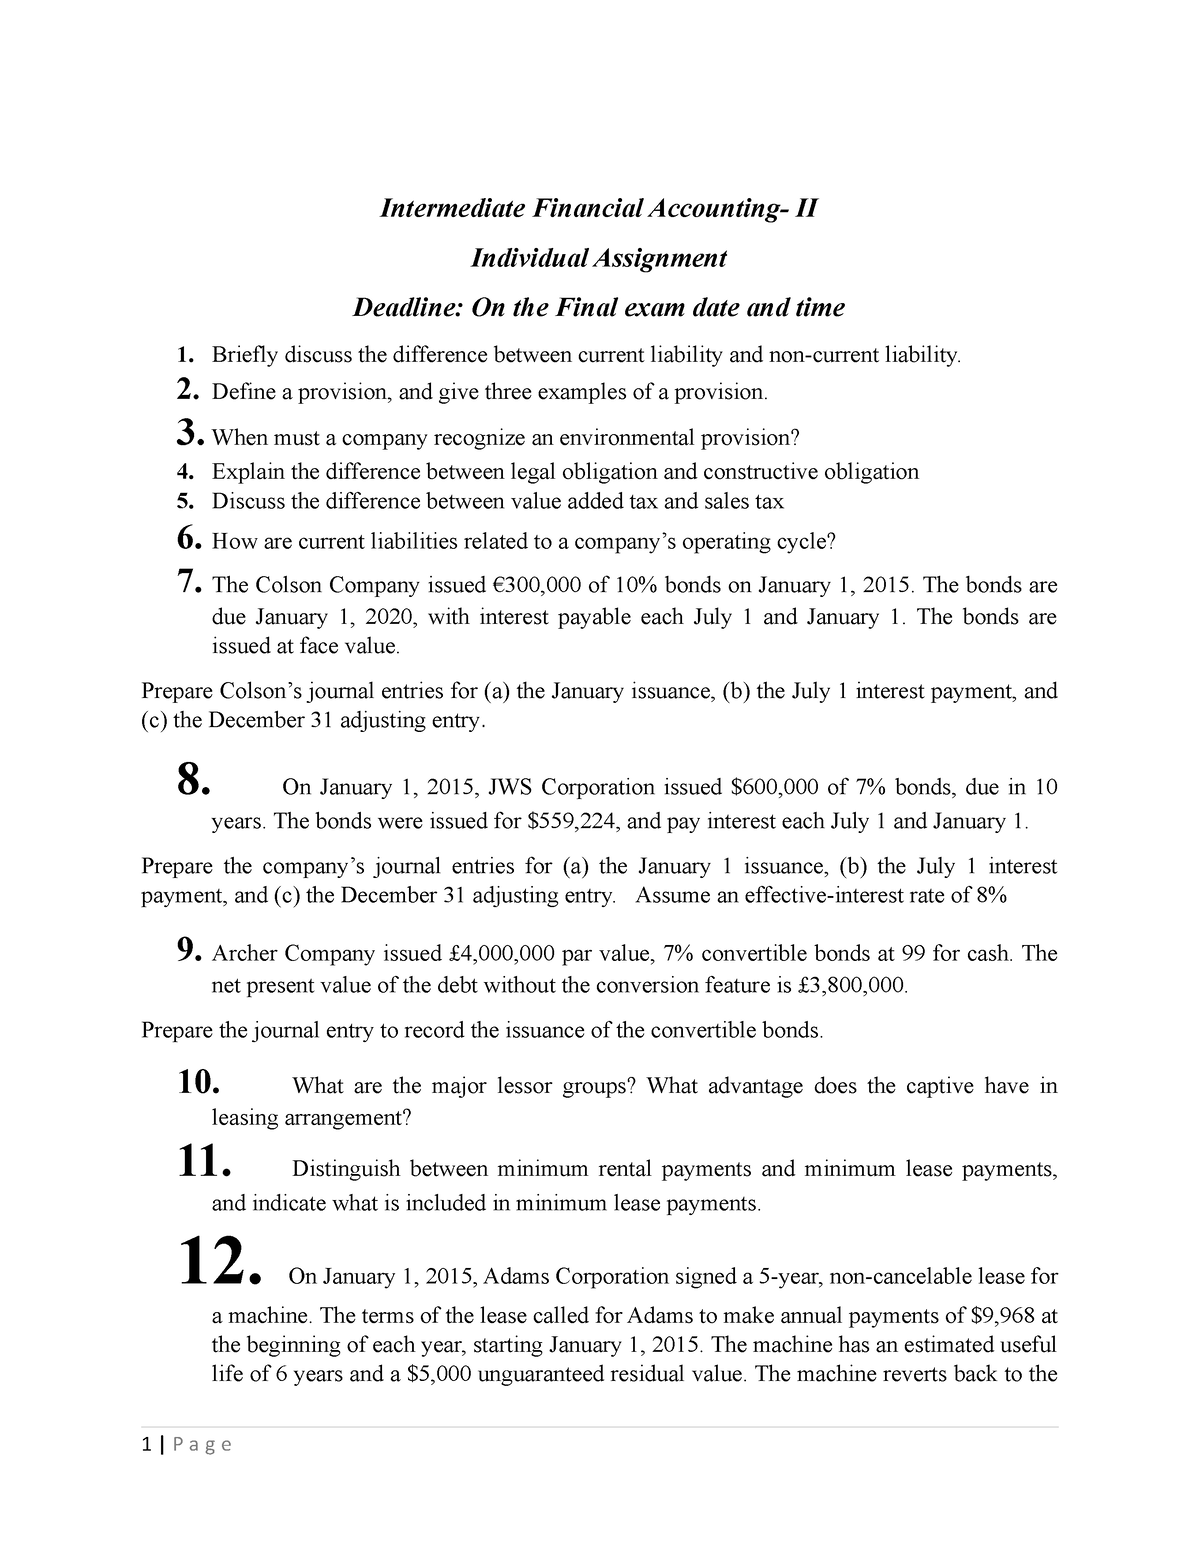 intermediate financial accounting assignment